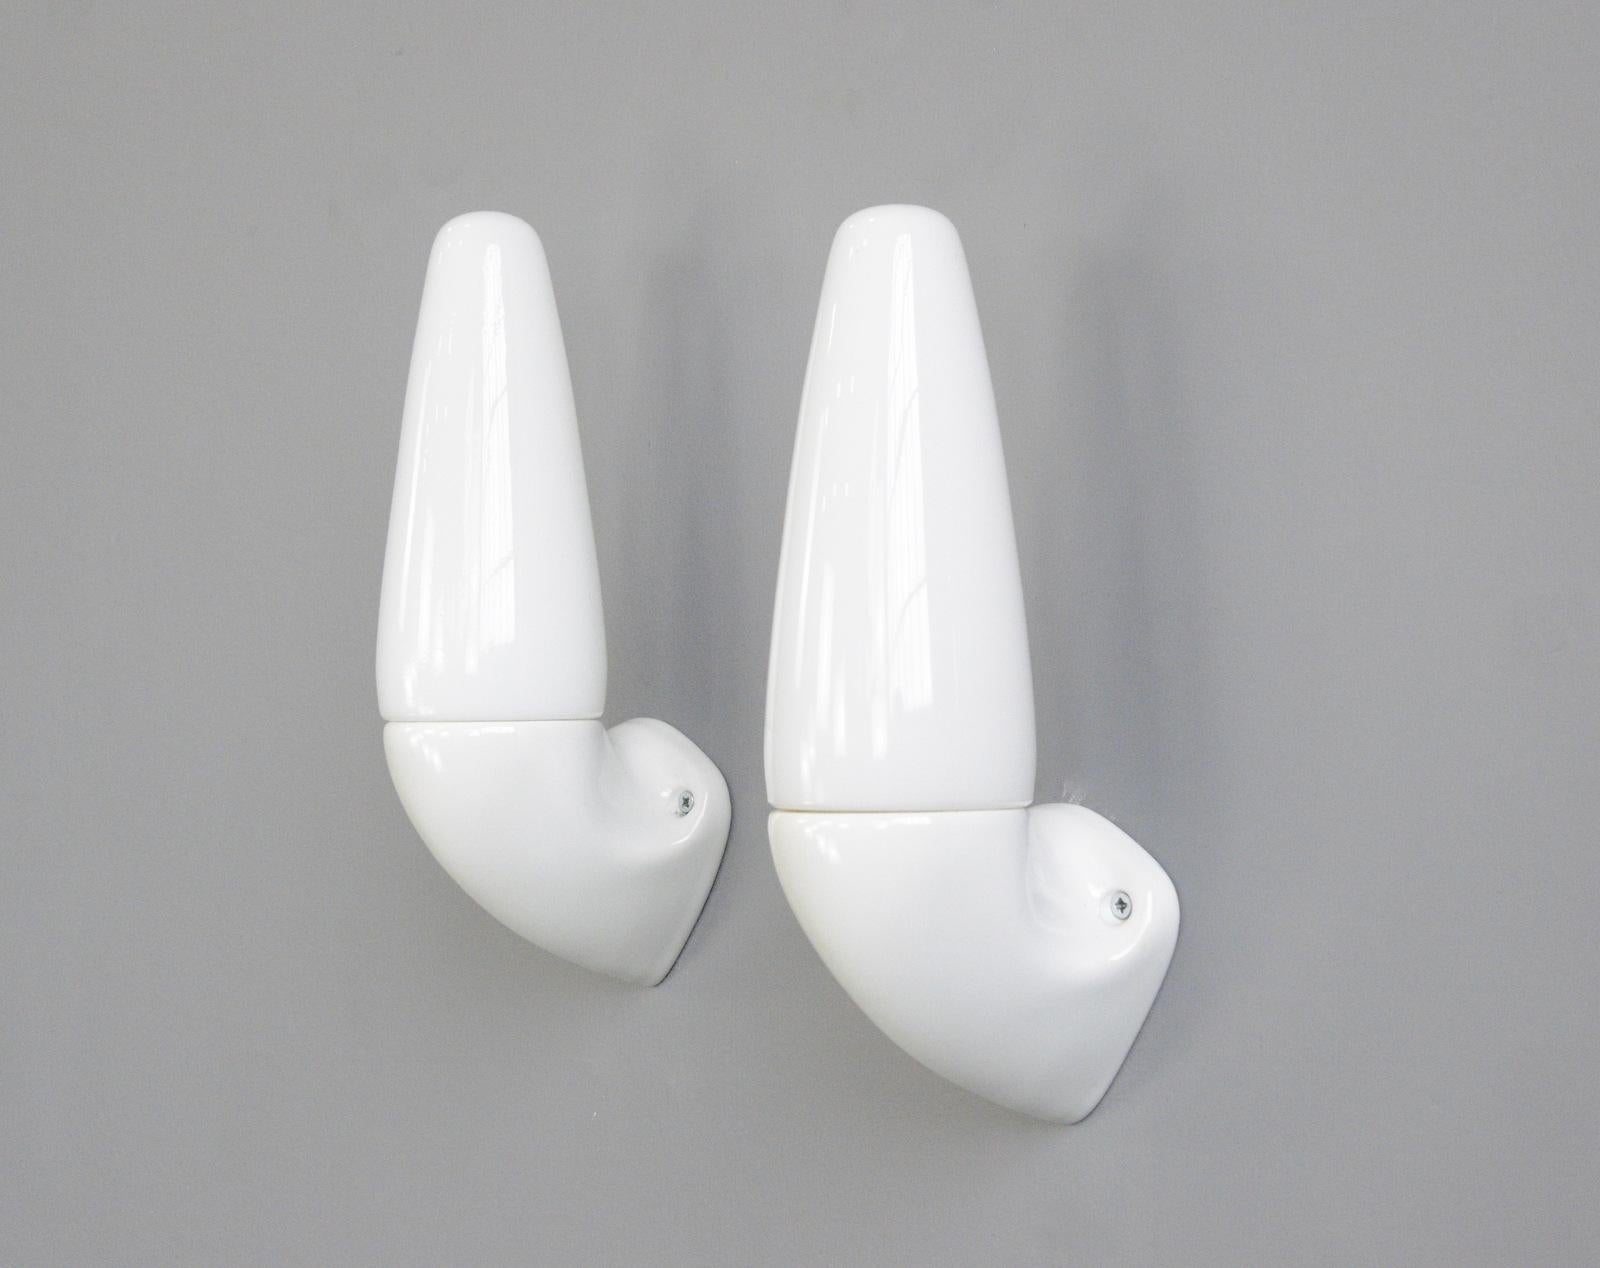 Porcelain bathroom lights by Sigvard Bernadotte for Ifo Circa 1950s

- Worldwide shipping
- Price is per light (13 available)
- All prices inc VAT
- Vitreous white porcelain wall mounts
- Screw off opaline shades
- Takes E14 fitting bulbs
- Wires